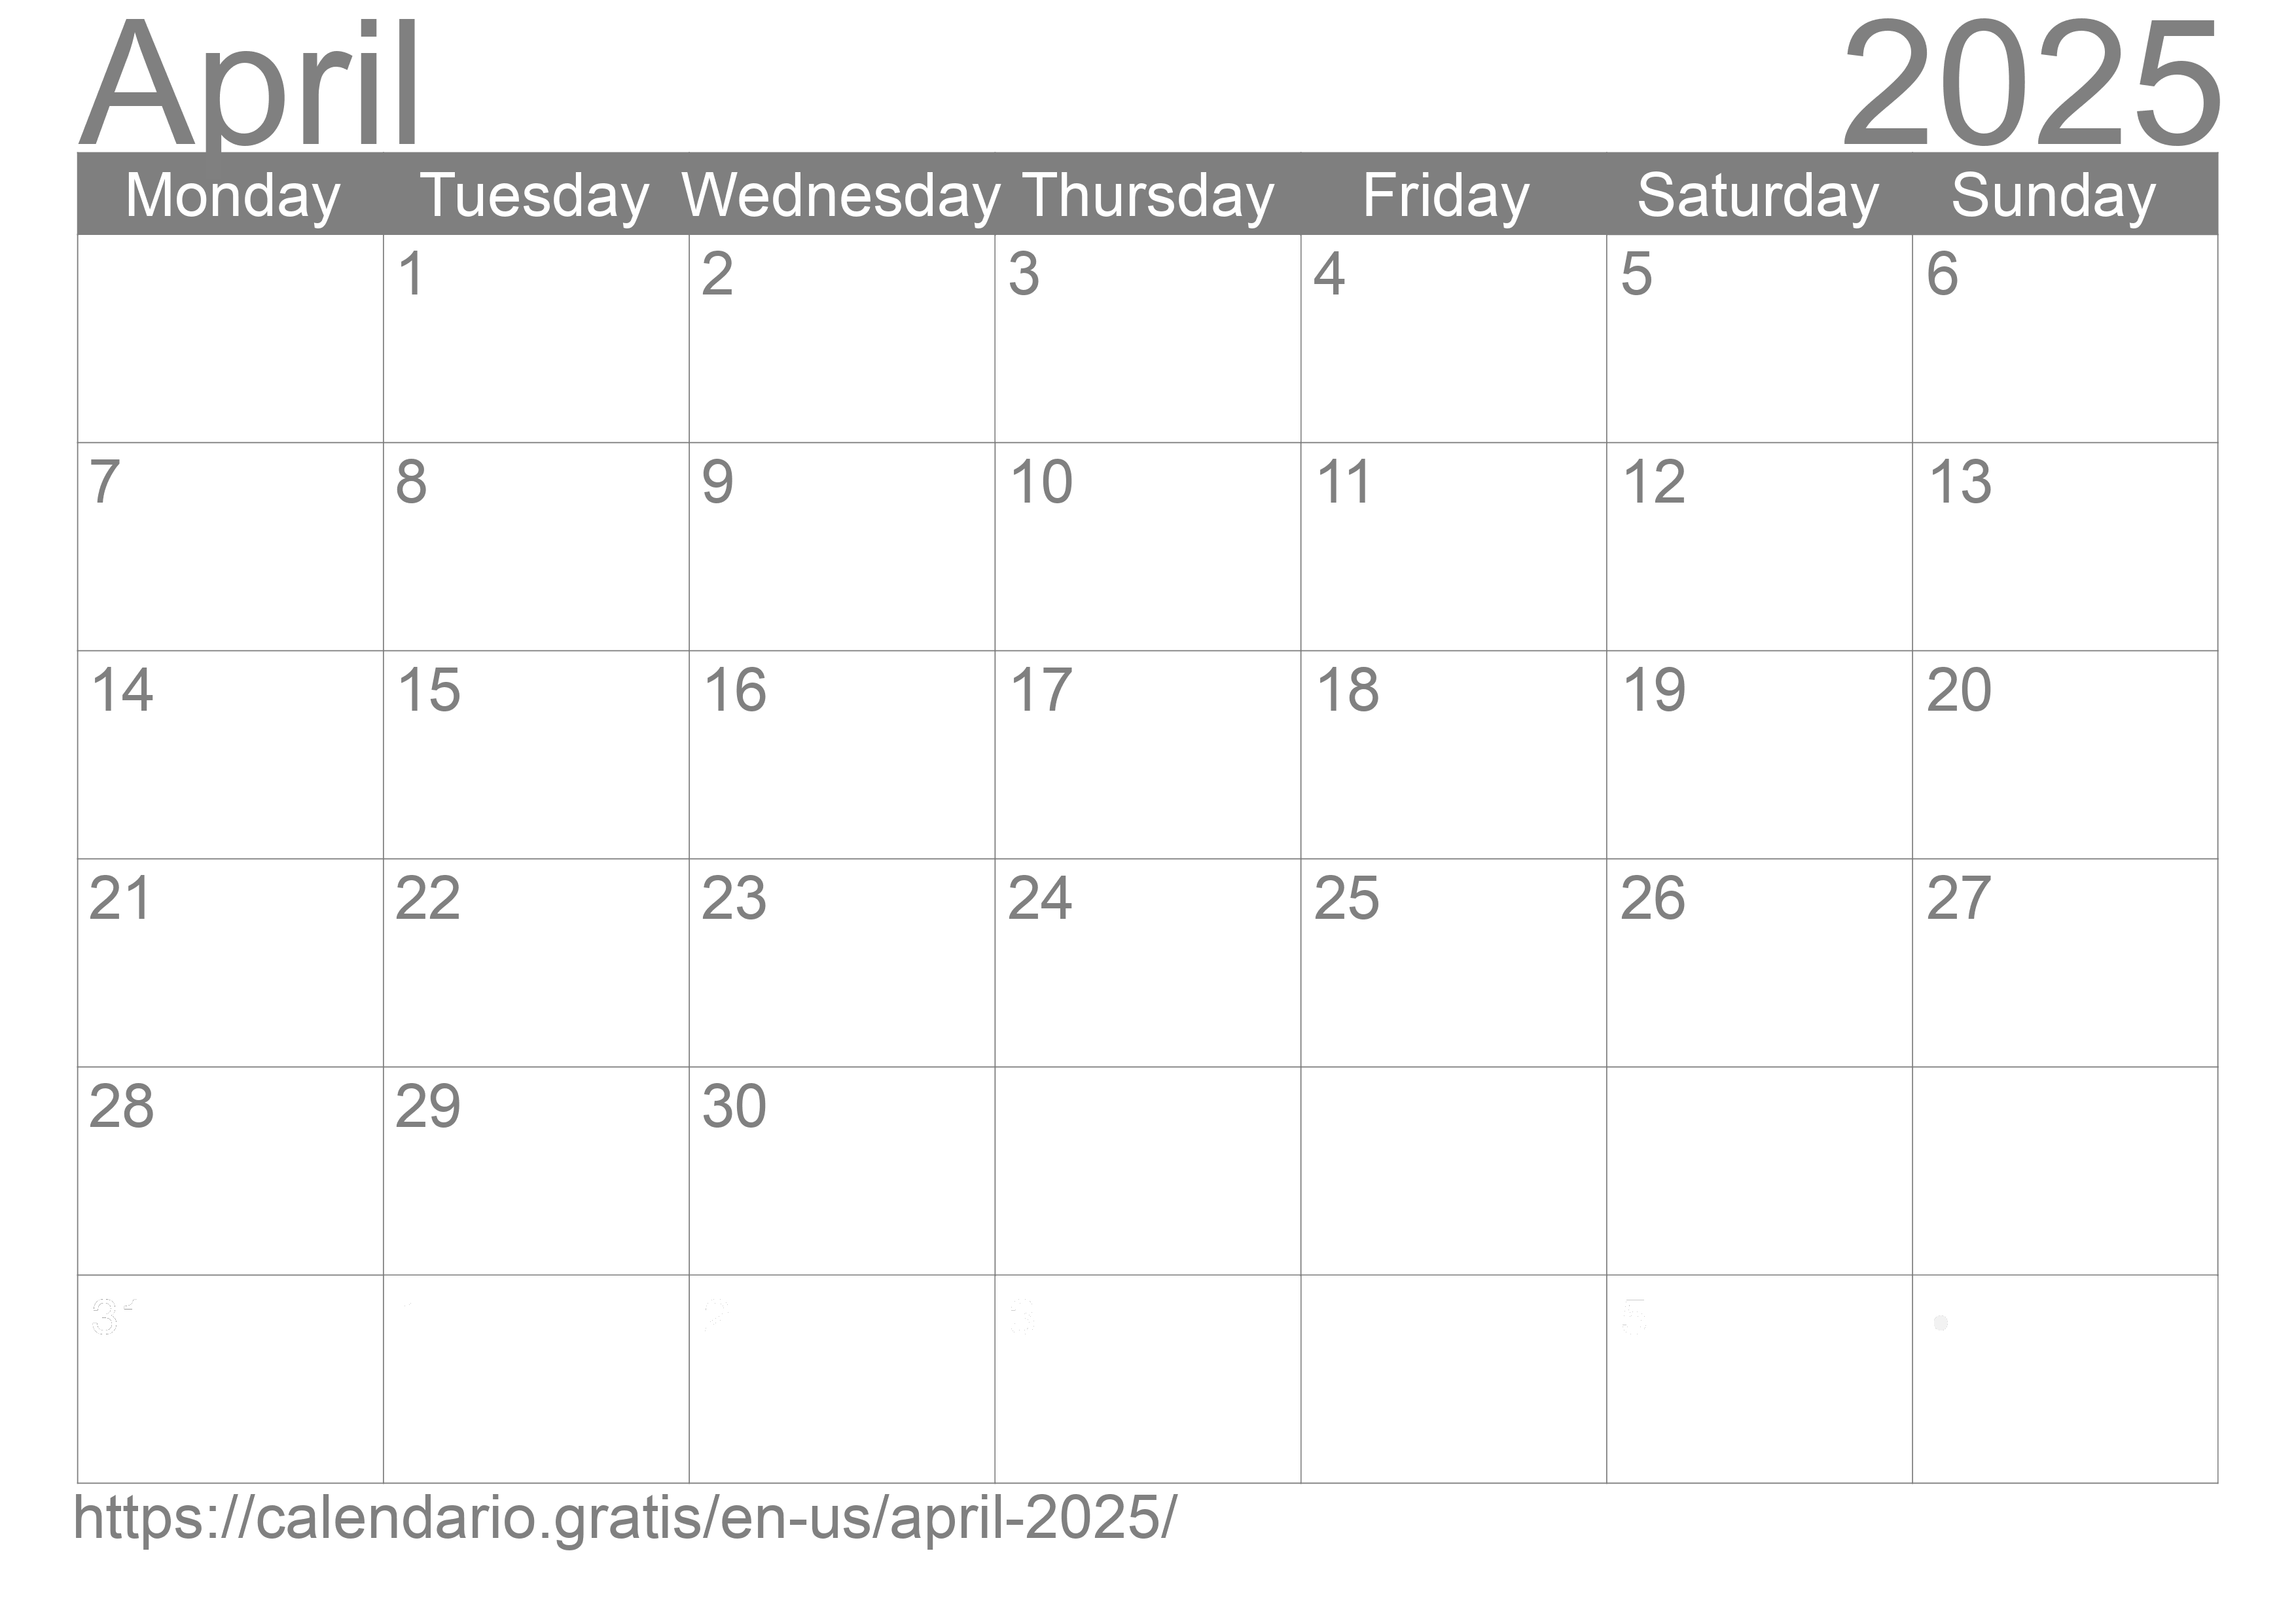 calendar-april-2025-from-united-states-of-america-in-english